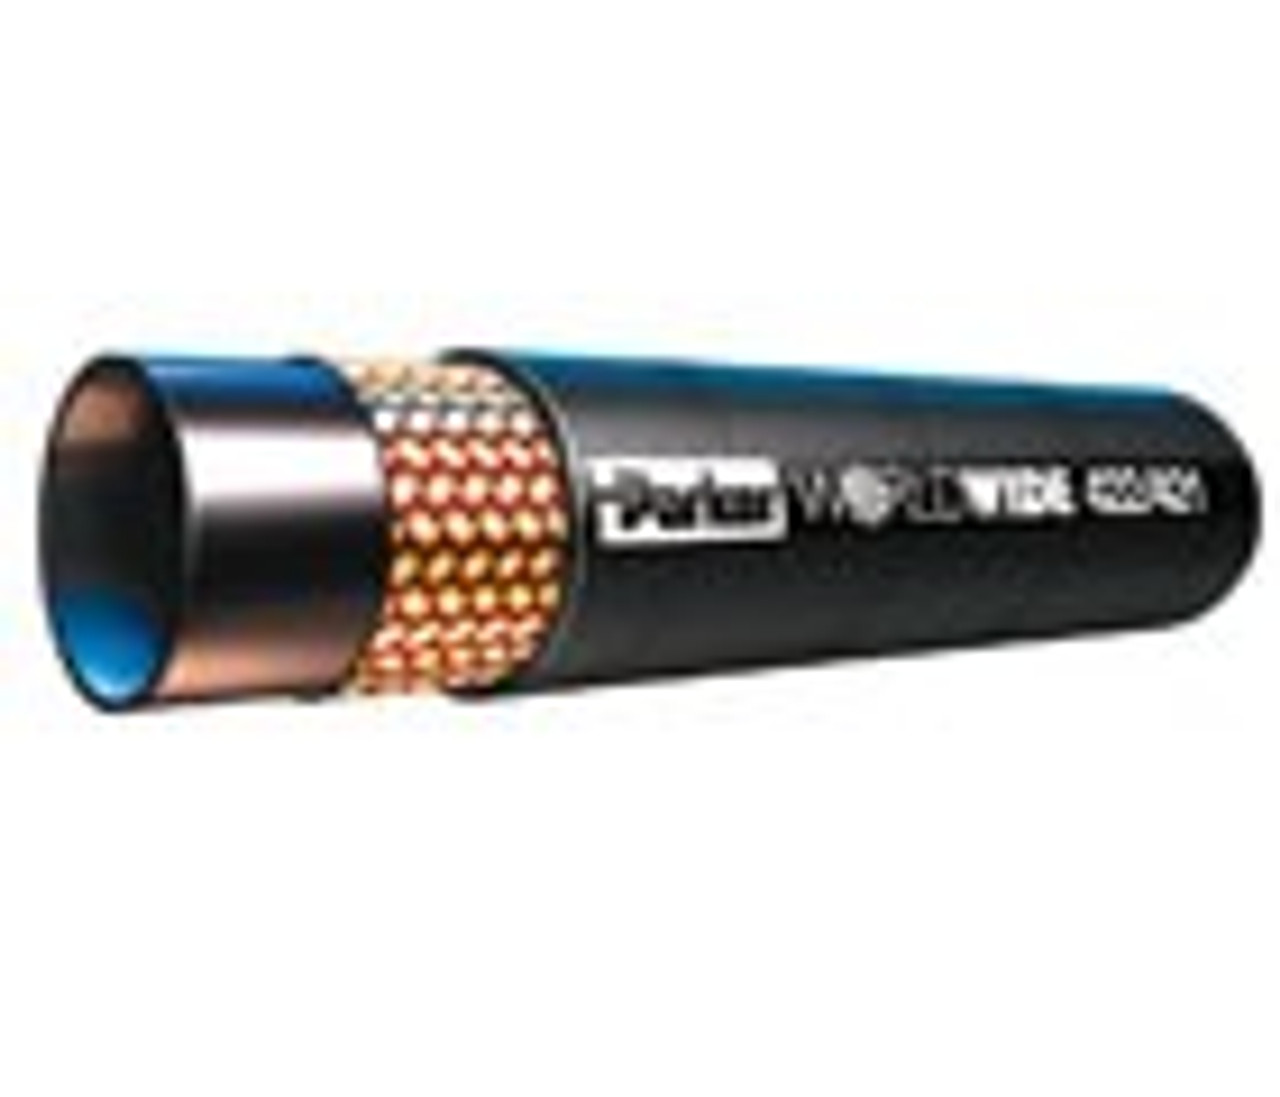 Parker 302-24 1-1/2" Id Worldwide Hydraulic Hose Black Synthetic Rubber Cover With Black Layline 1300Psi (90Bar) 2 Wire Braids Temp Range Degrees F: (-40/+212) Sae 100R2At Iso 1436-1-2Sn